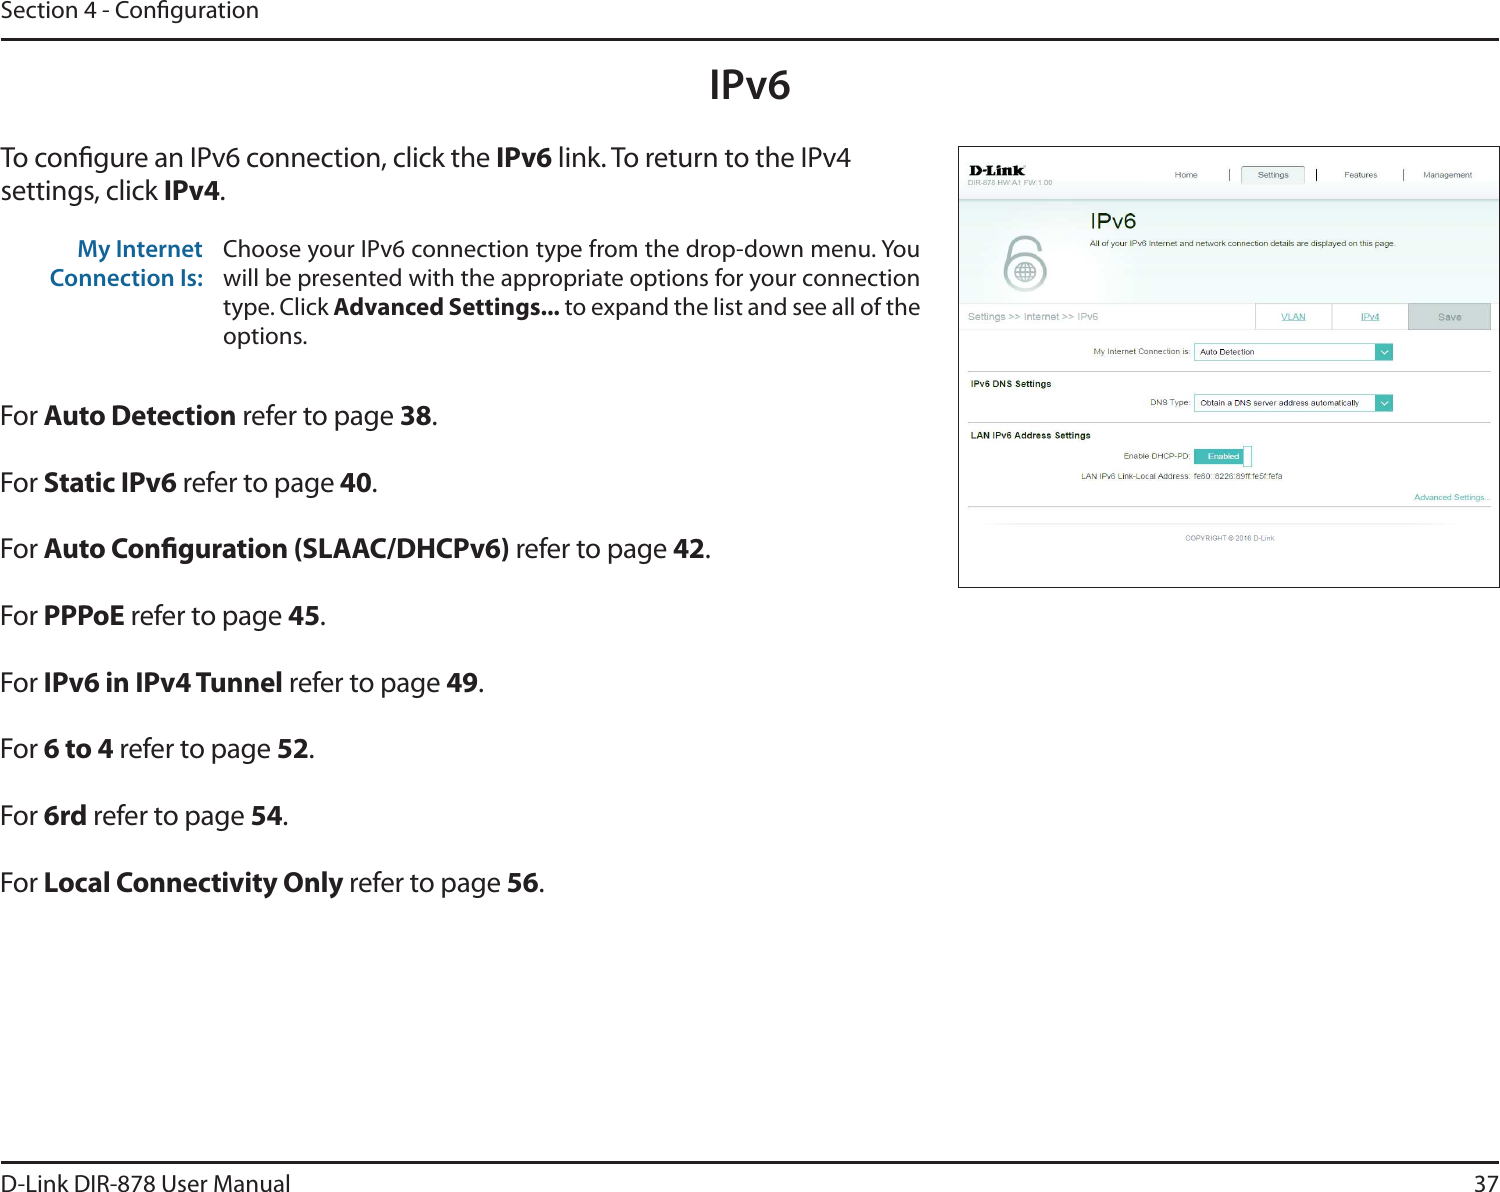 37D-Link DIR-878 User ManualSection 4 - CongurationIPv6To congure an IPv6 connection, click the IPv6 link. To return to the IPv4 settings, click IPv4.For &quot;VUP%FUFDUJPO refer to page 38.For Static IPv6 refer to page 40.For &quot;VUP$POöHVSBUJPO4-&quot;&quot;$%)$1W refer to page 42.For 111P&amp; refer to page 45.For IPv6 in IPv4 Tunnel refer to page 49.For 6 to 4 refer to page 52.For 6rd refer to page 54.For -PDBM$POOFDUJWJUZ0OMZ refer to page 56.My Internet Connection Is:Choose your IPv6 connection type from the drop-down menu. You will be presented with the appropriate options for your connection type. Click &quot;EWBODFE4FUUJOHT to expand the list and see all of the options.